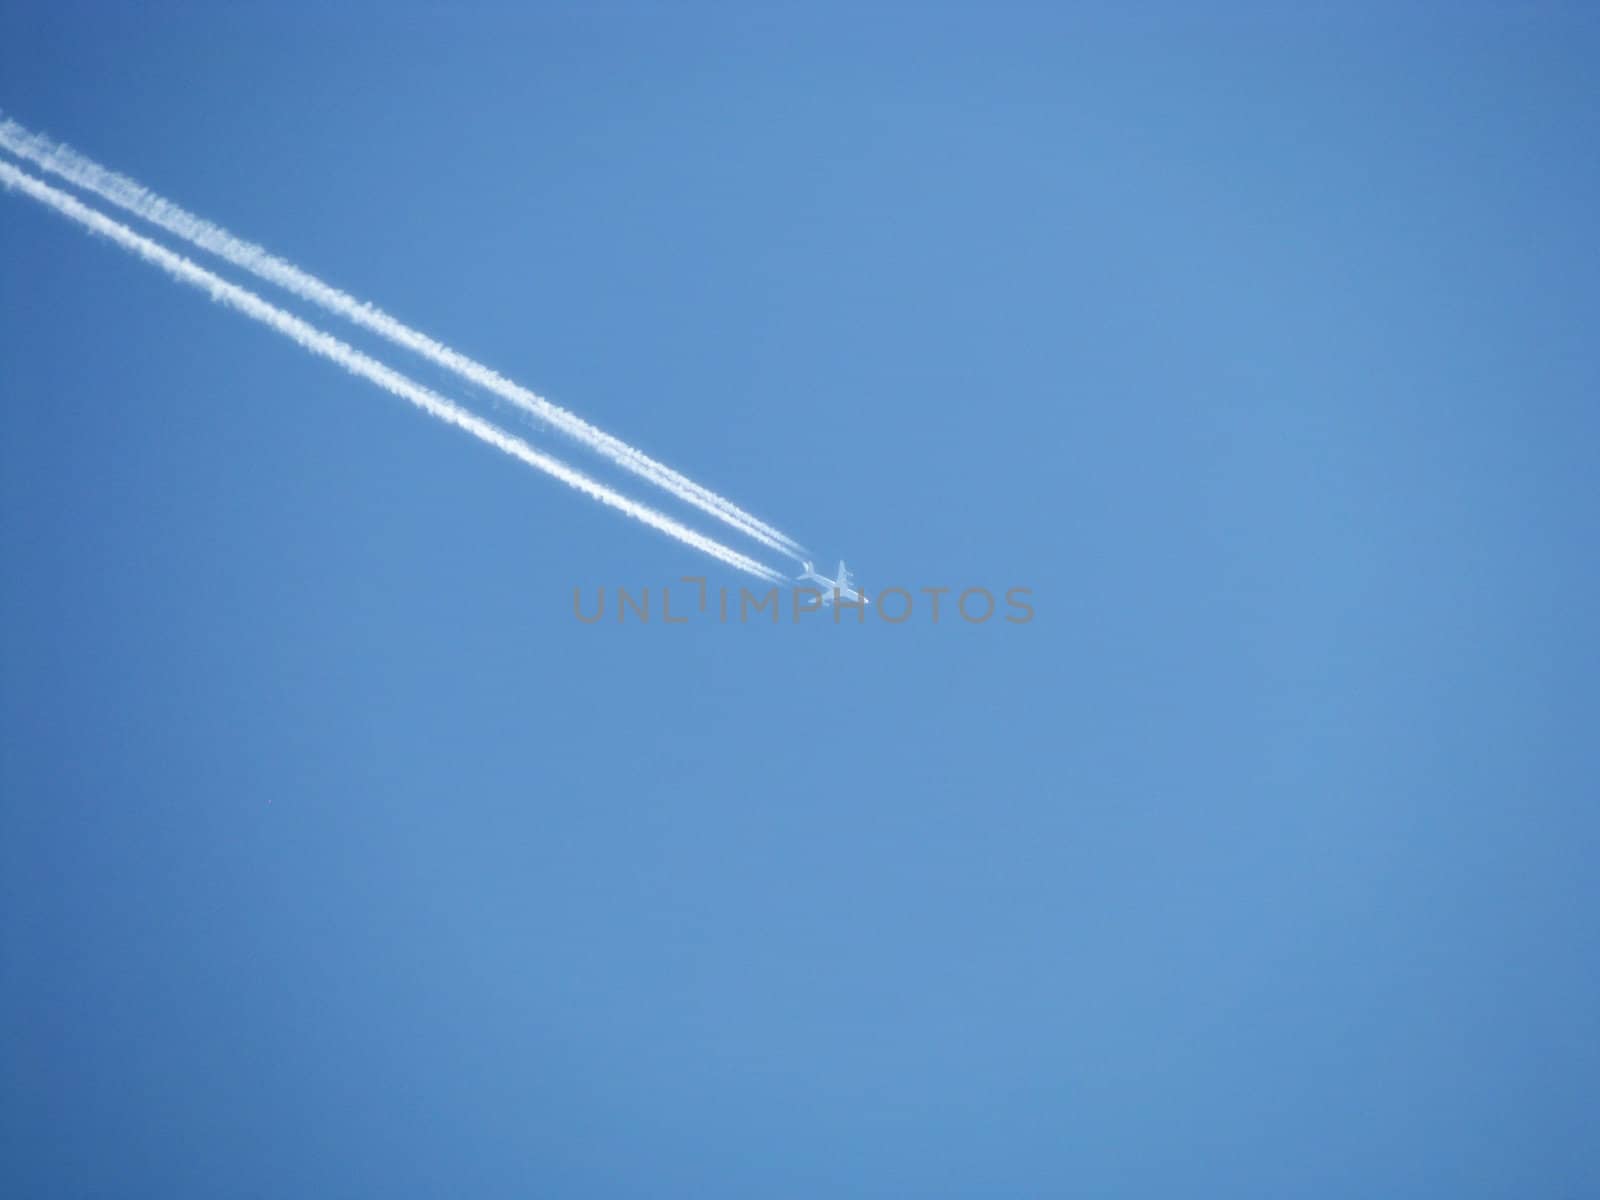 The plane on a background of the blue sky